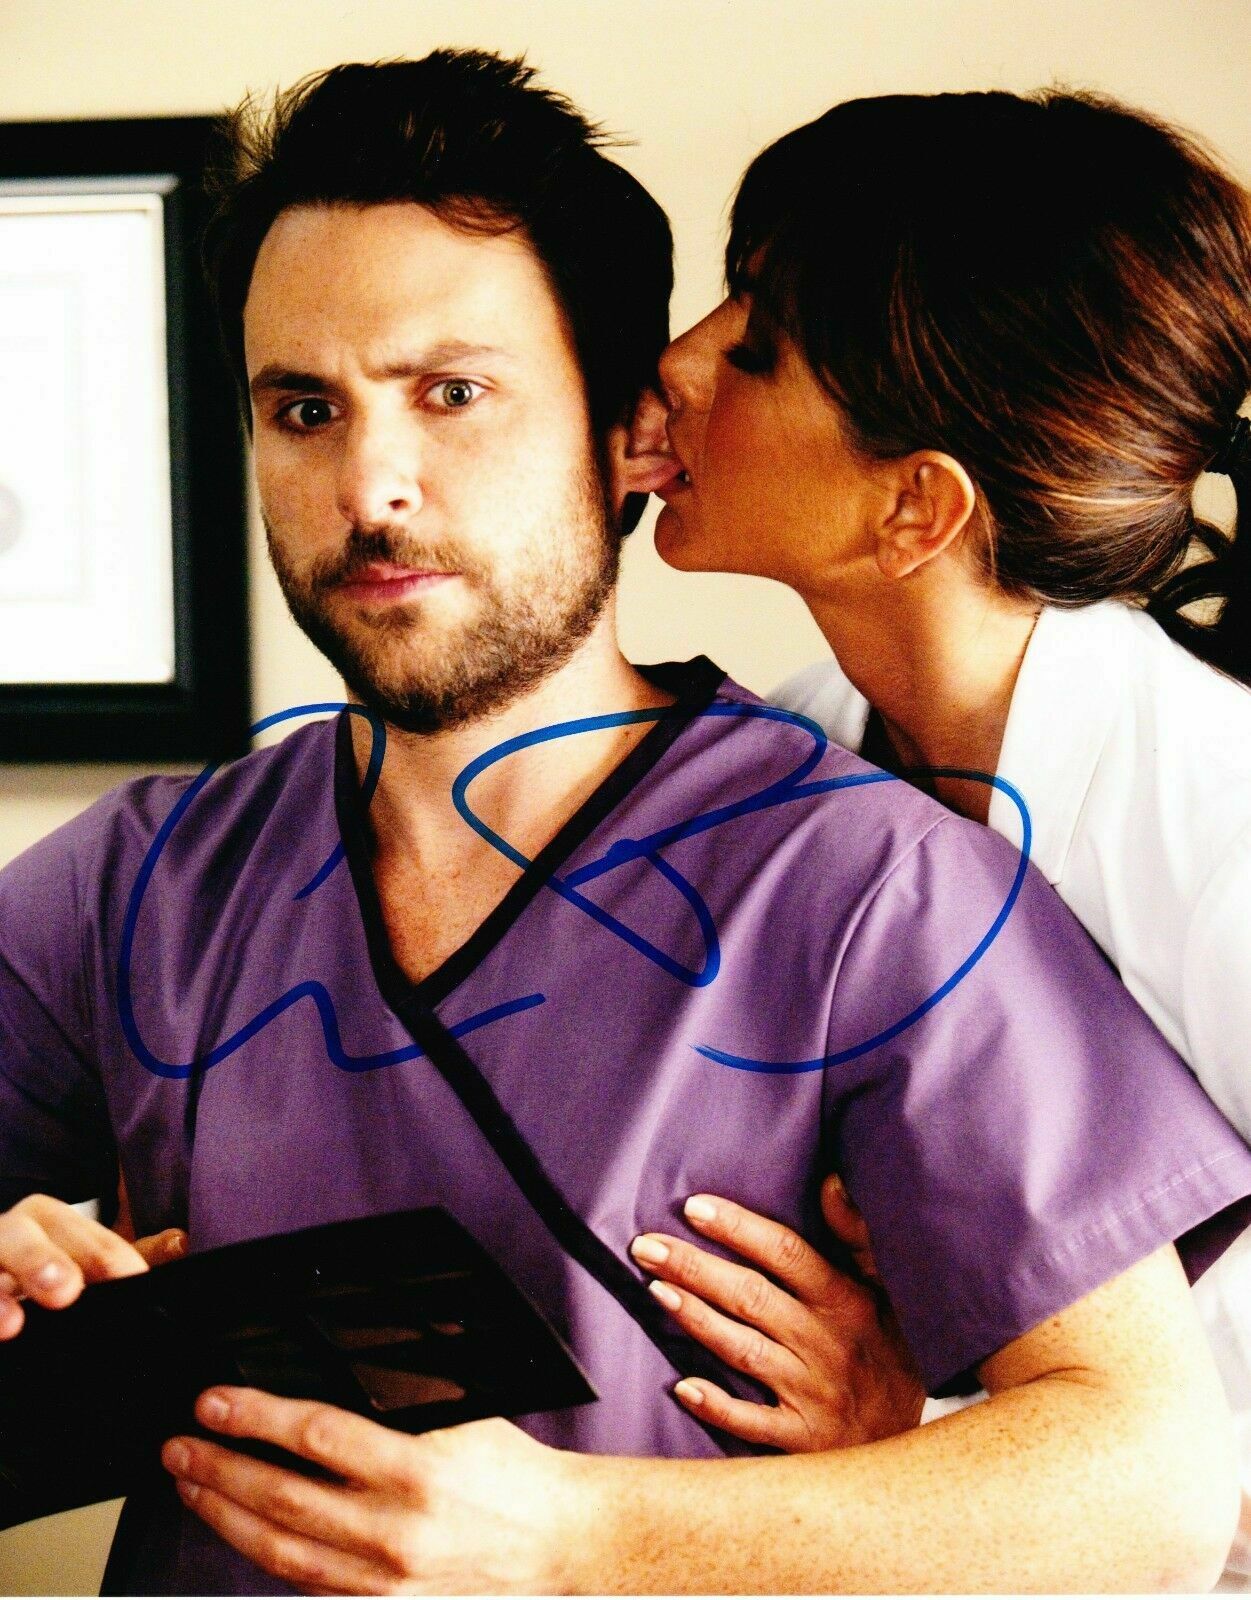 Charlie Day Autographed Signed 8x10 Photo ( Horrible Bosses ) Reprint